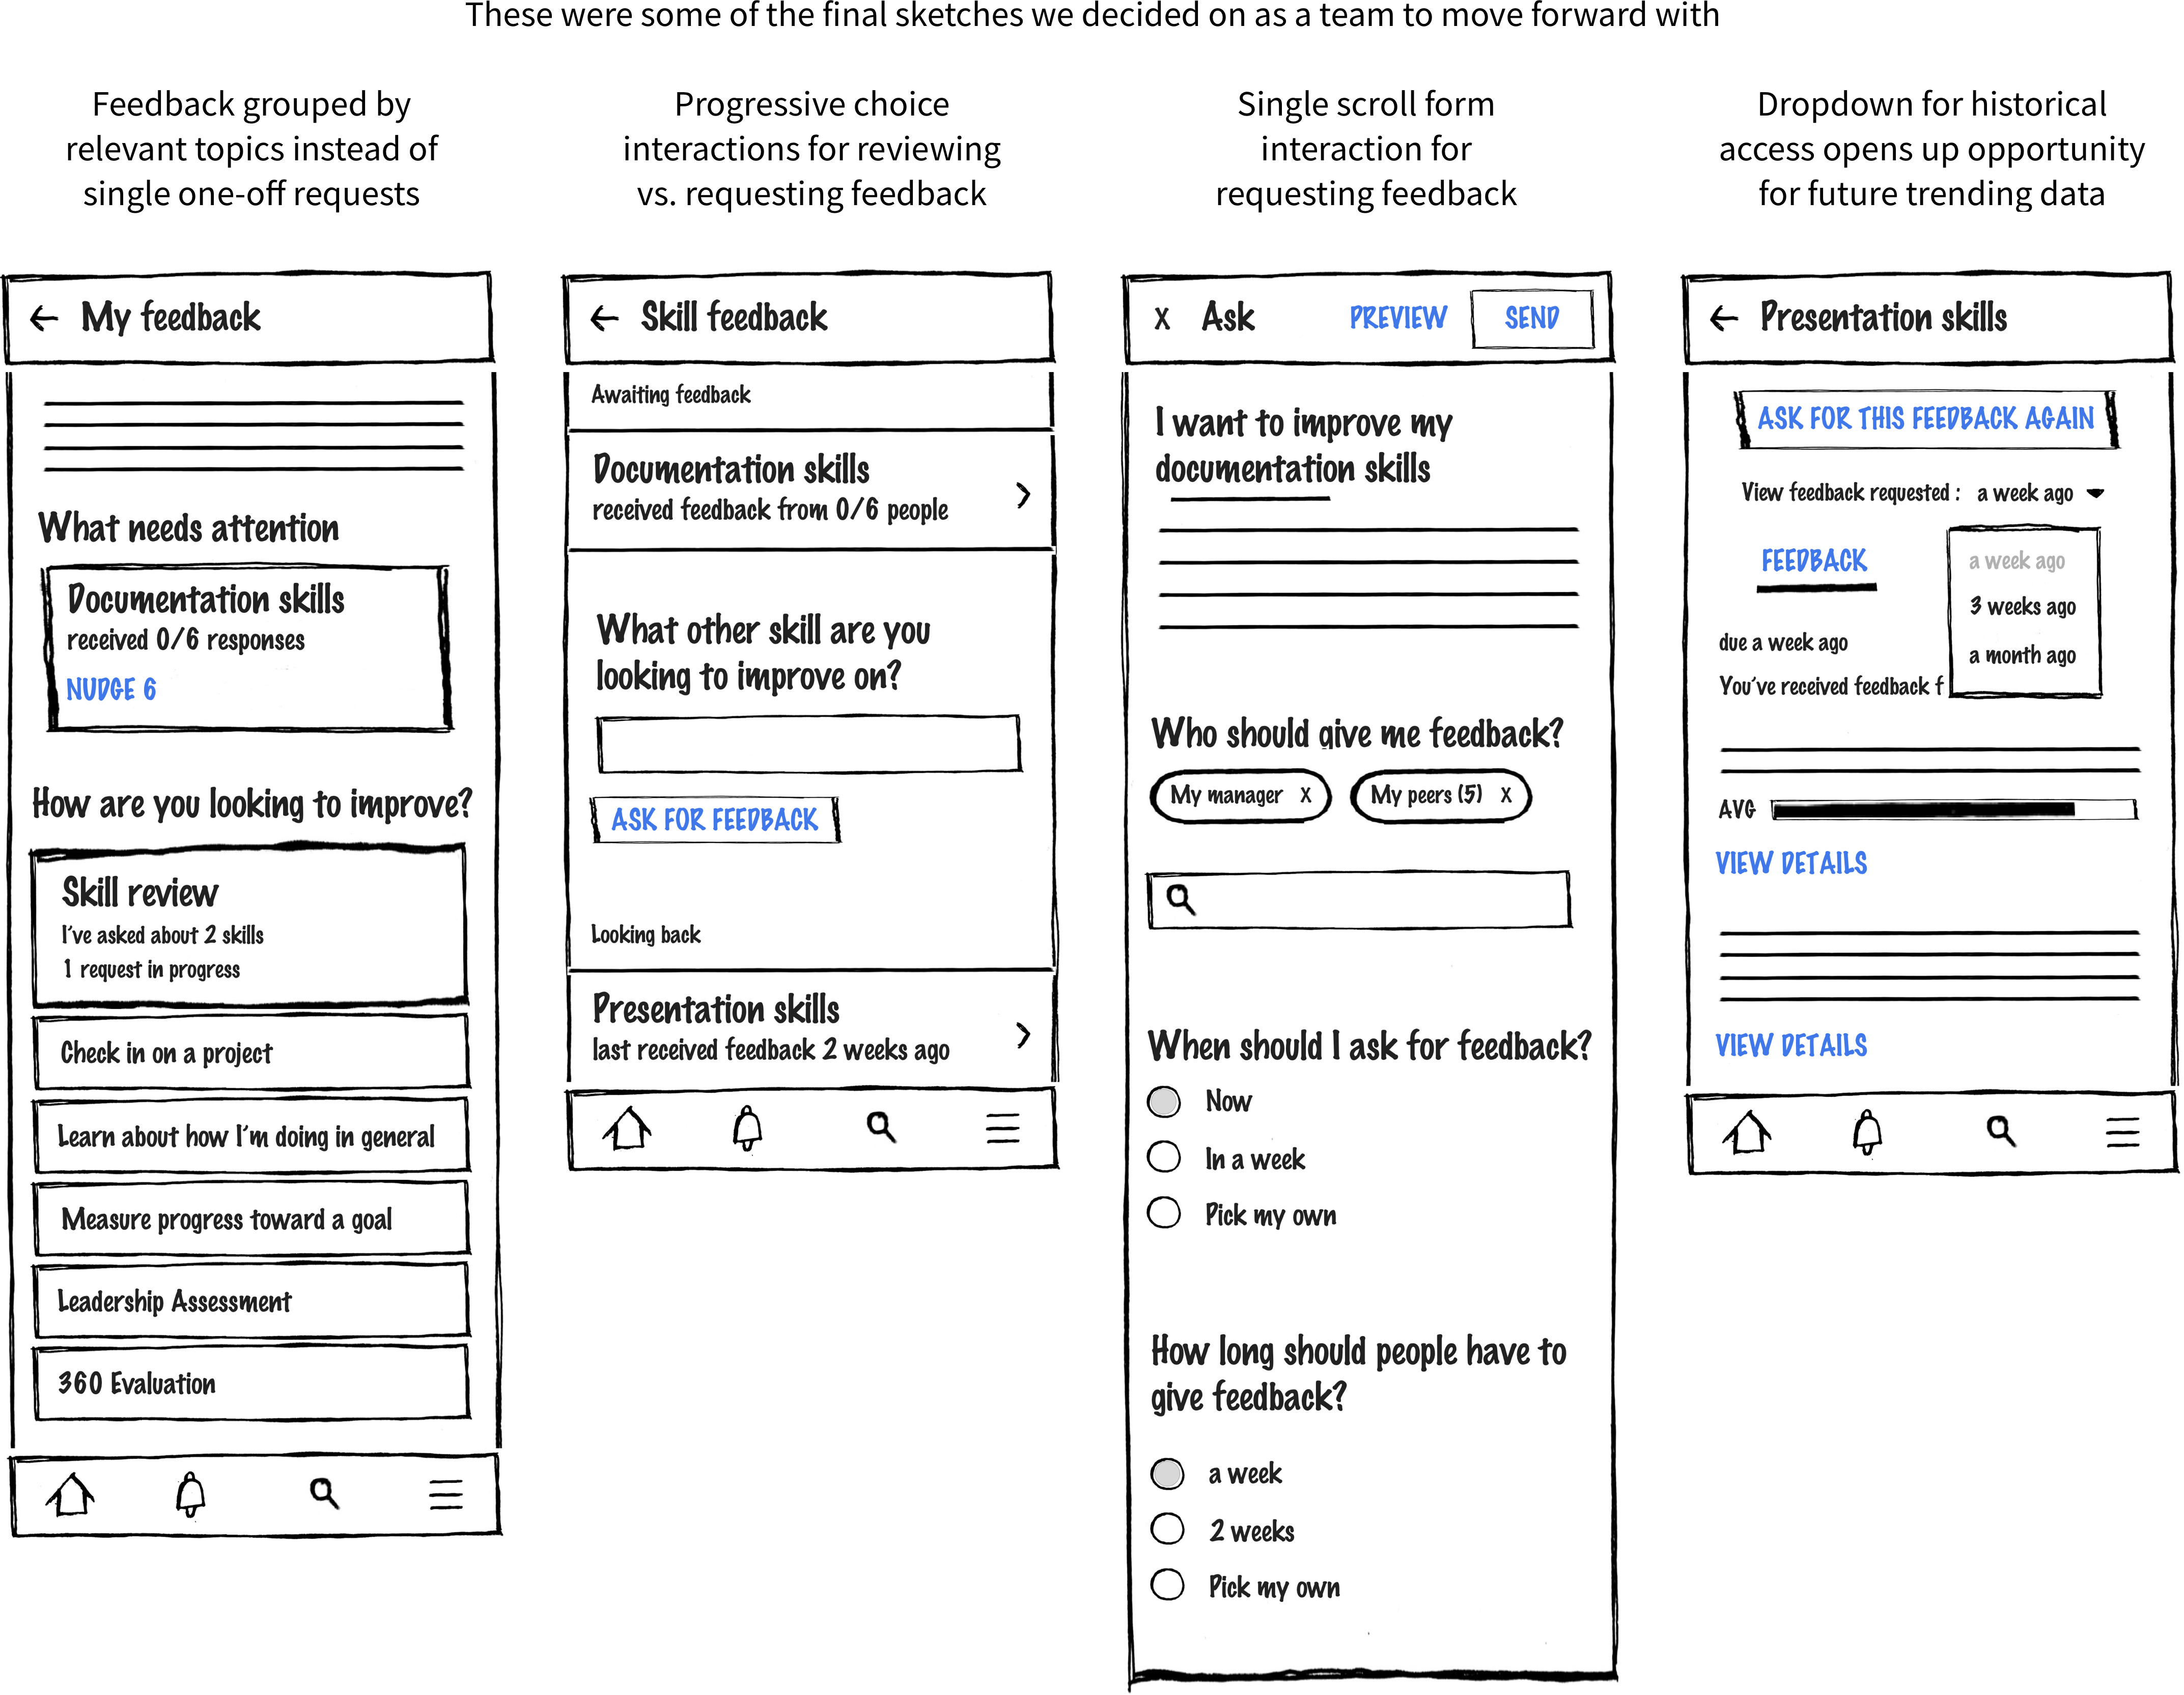 wireframes for the following flows: 1) feedback grouped by relevant topics 2) progressive disclosure 3) single scroll form for feedback requests 4) dropdown for historical view